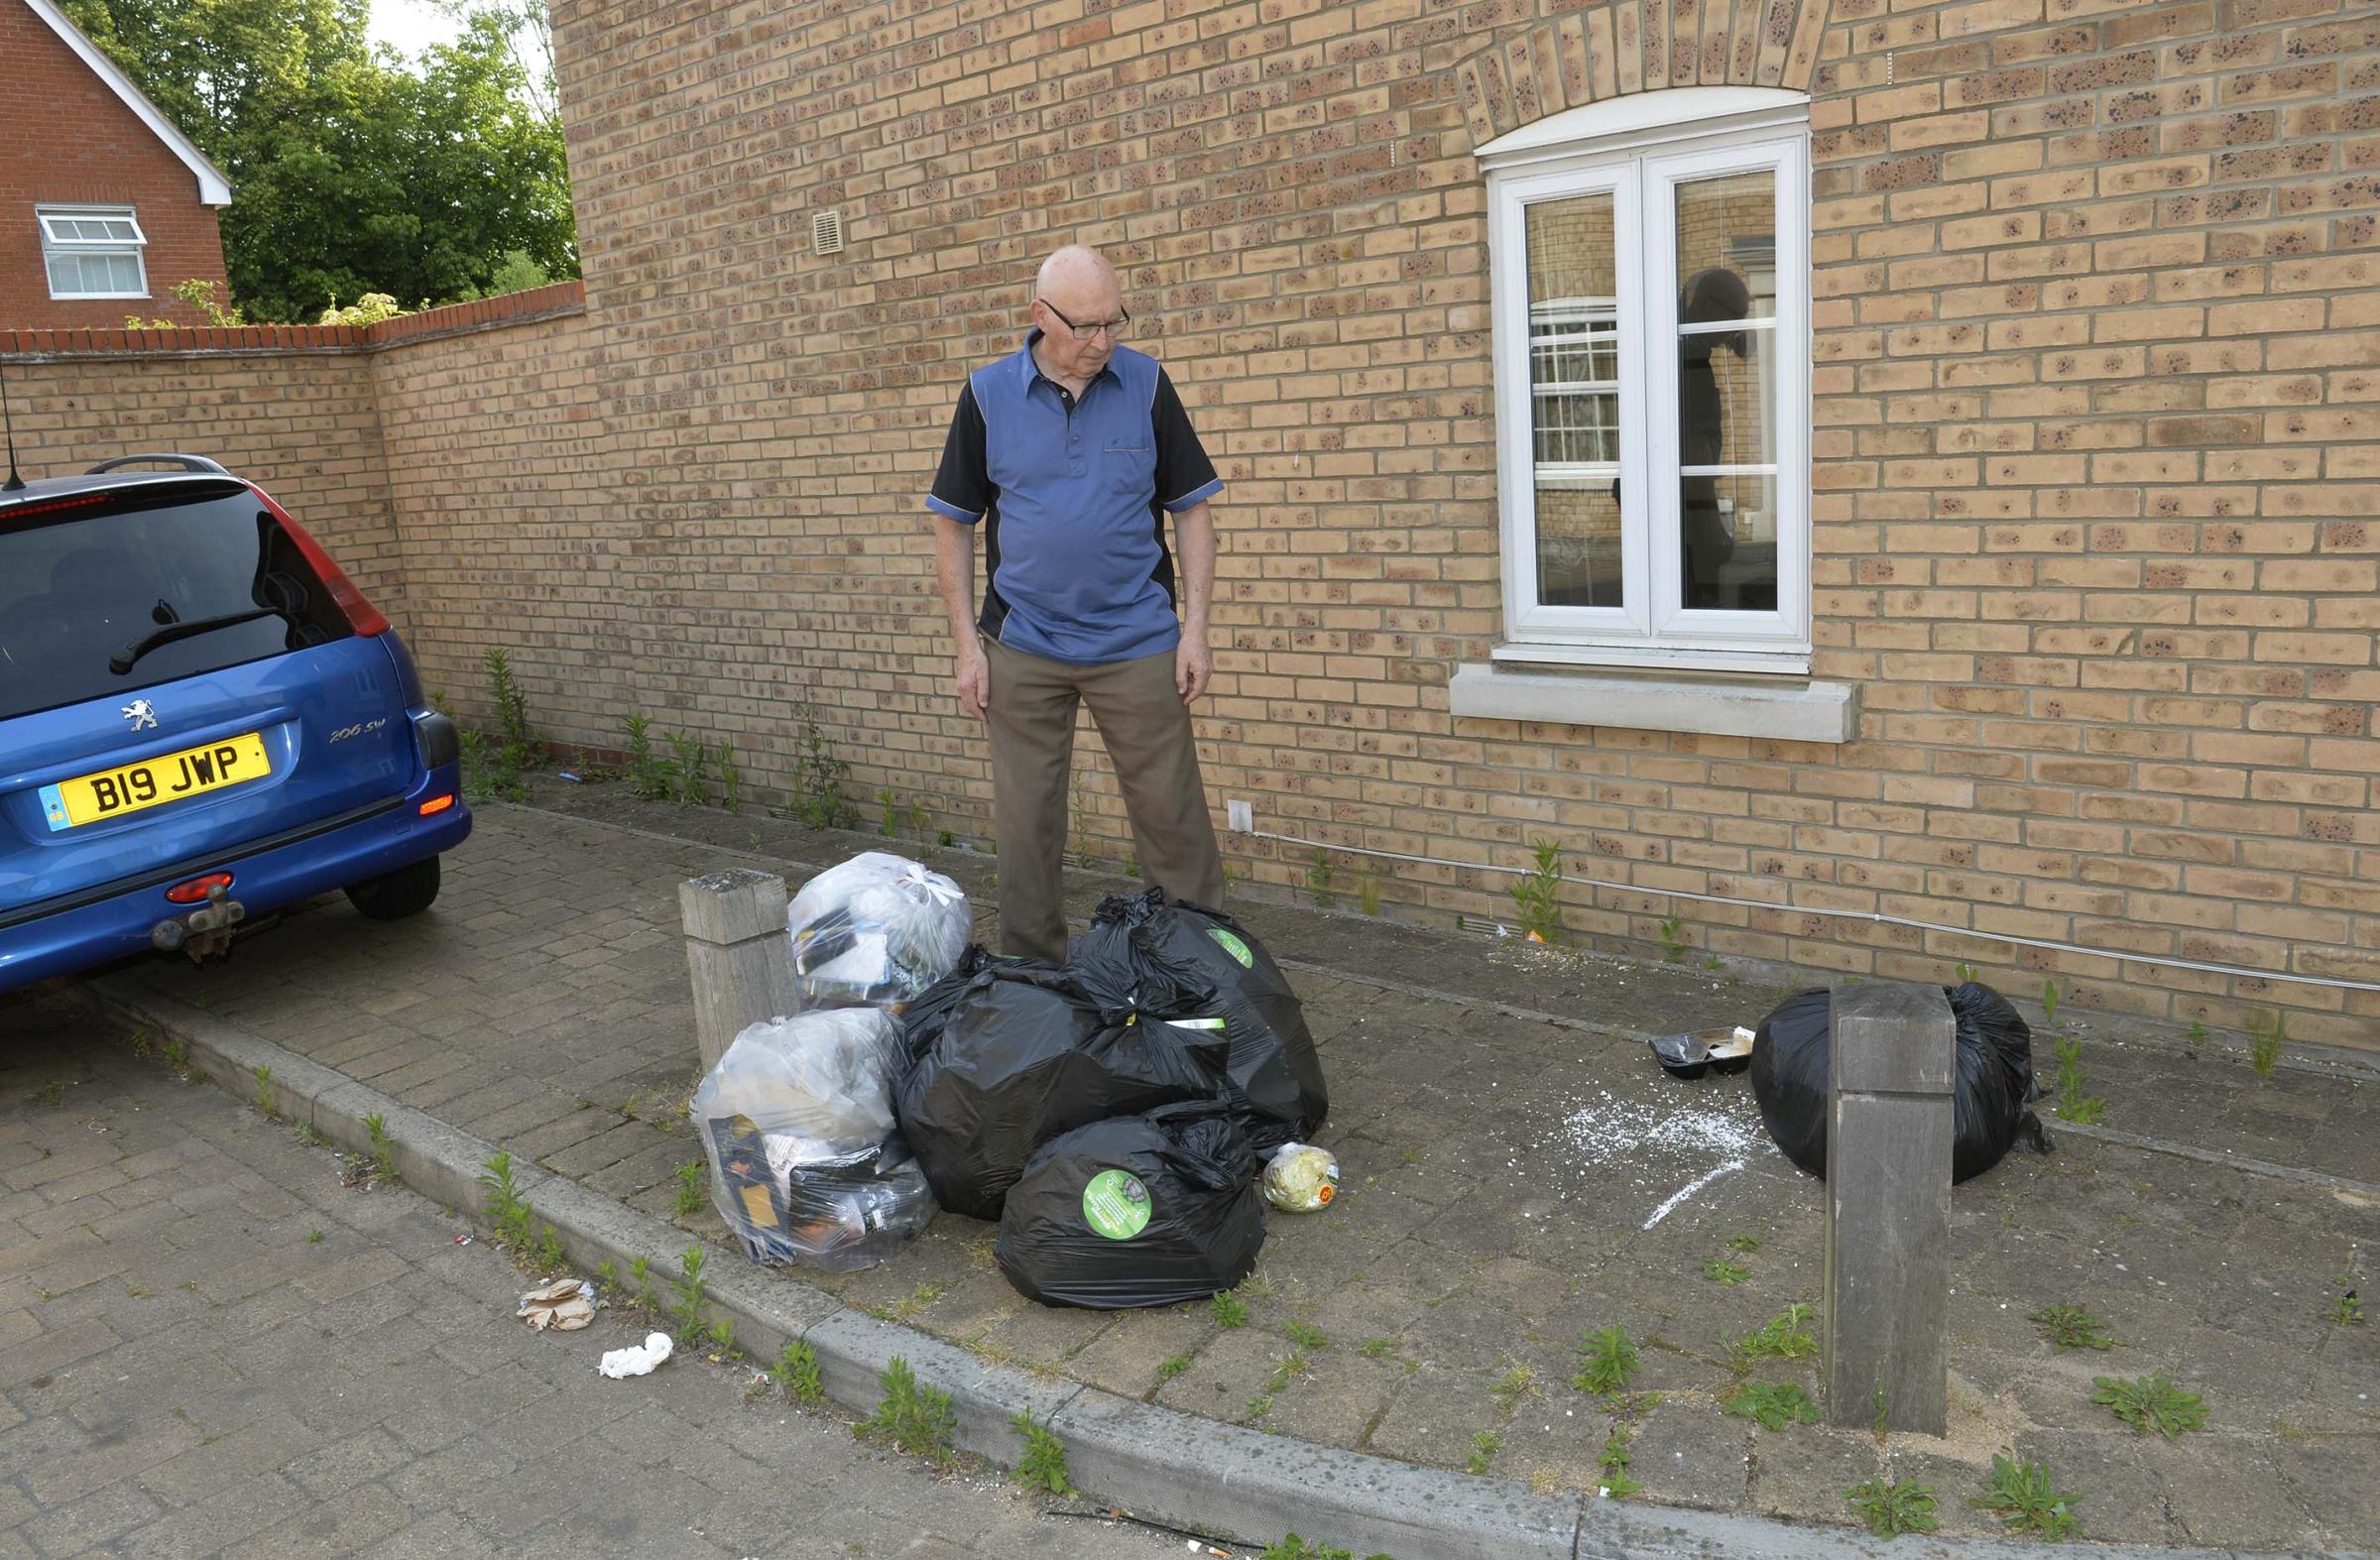 'Look at this mess' - resident's fury as black bags are left in street